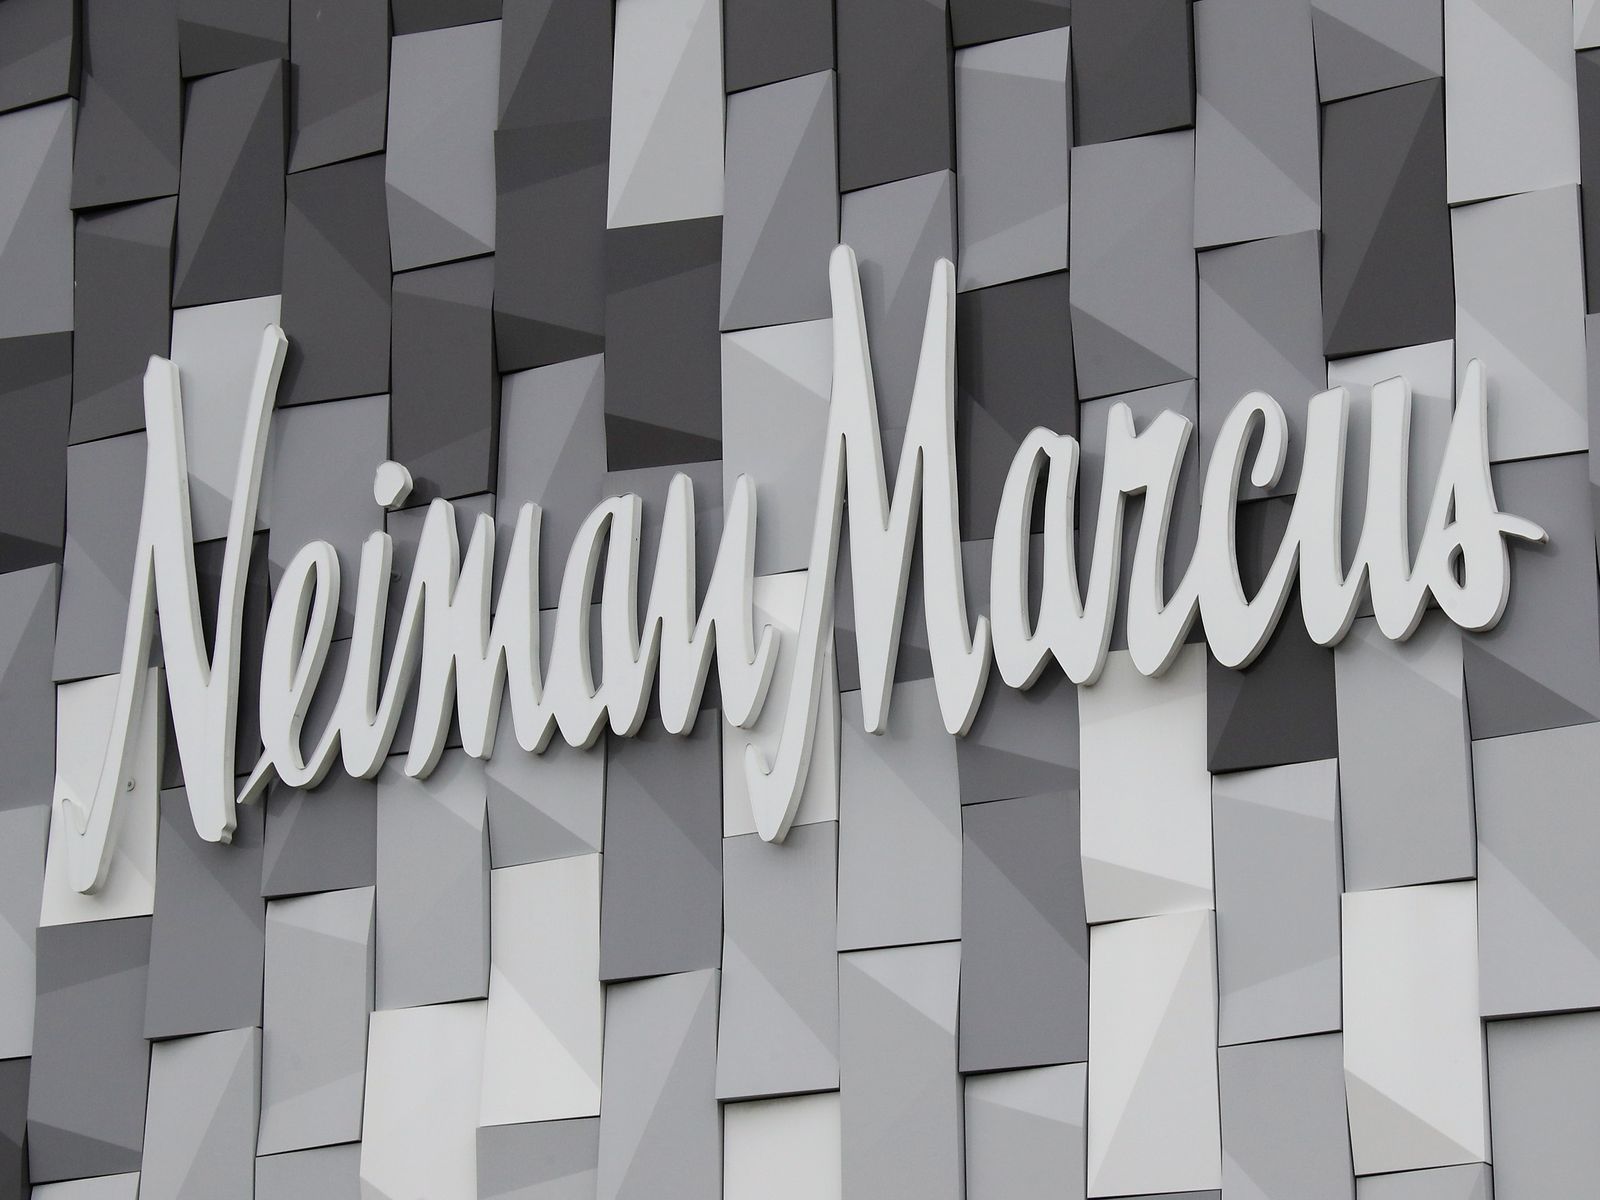 Neiman Marcus faces rift with big luxury labels including Gucci